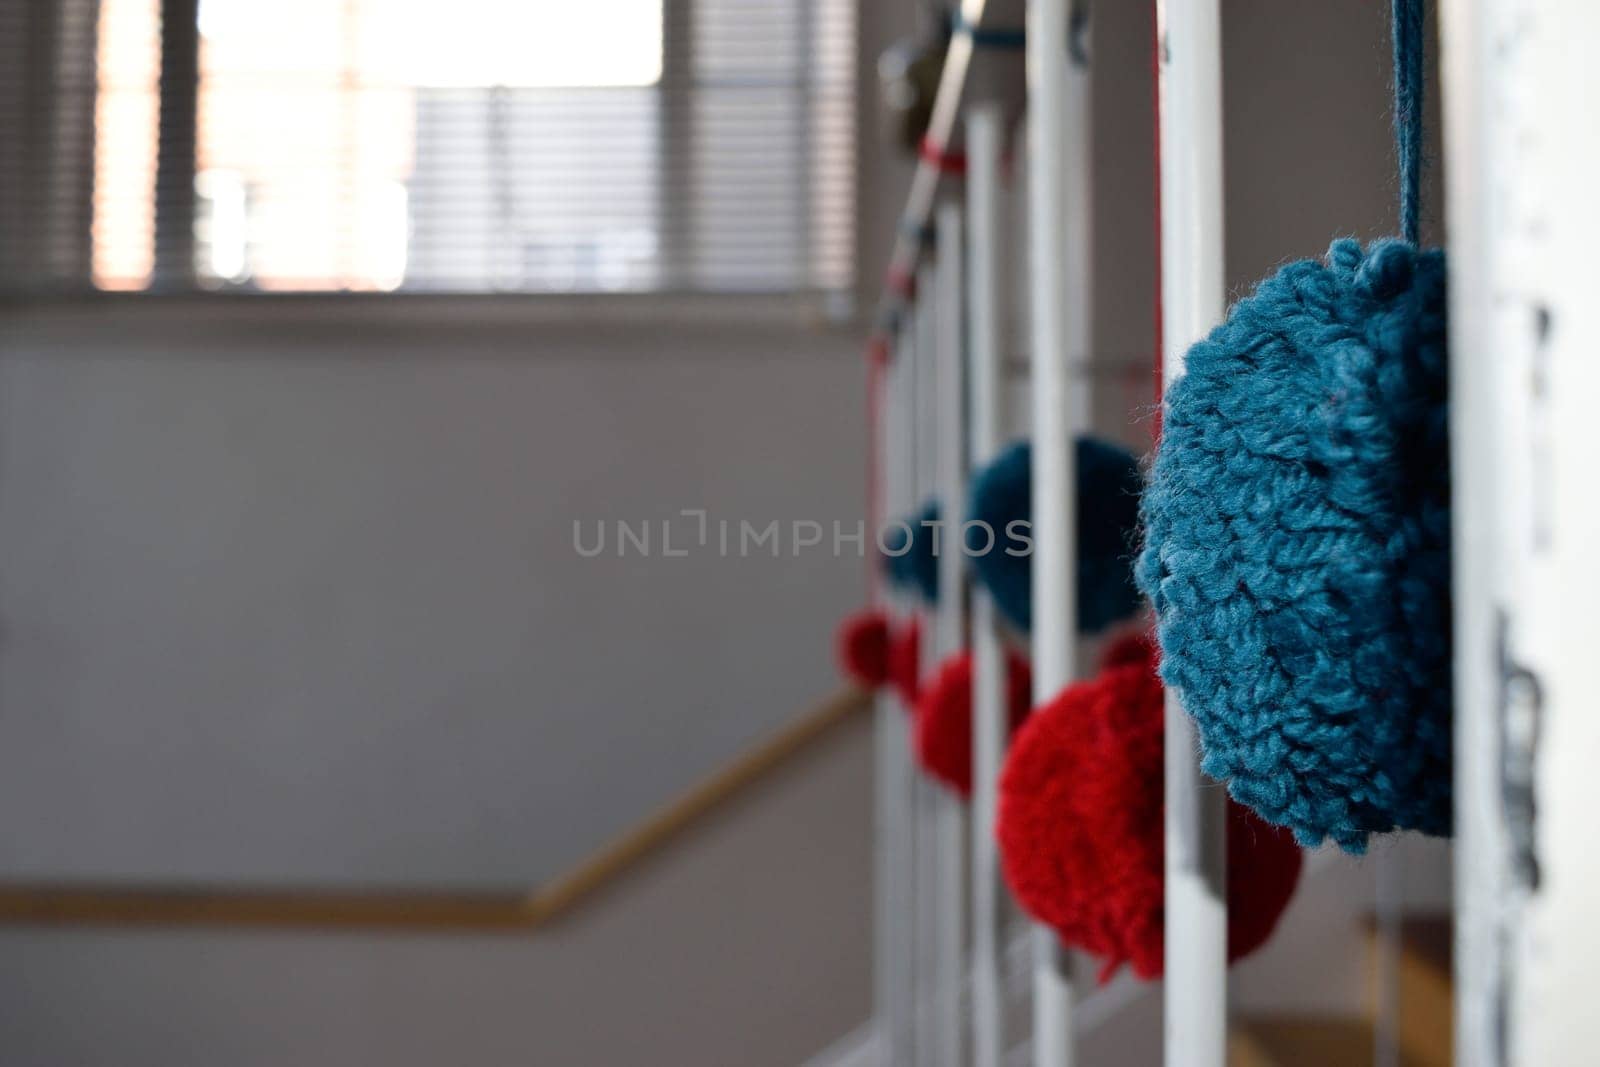 Close-up of colorful yarn pom-poms hanging on a staircase railing with a blurred background.